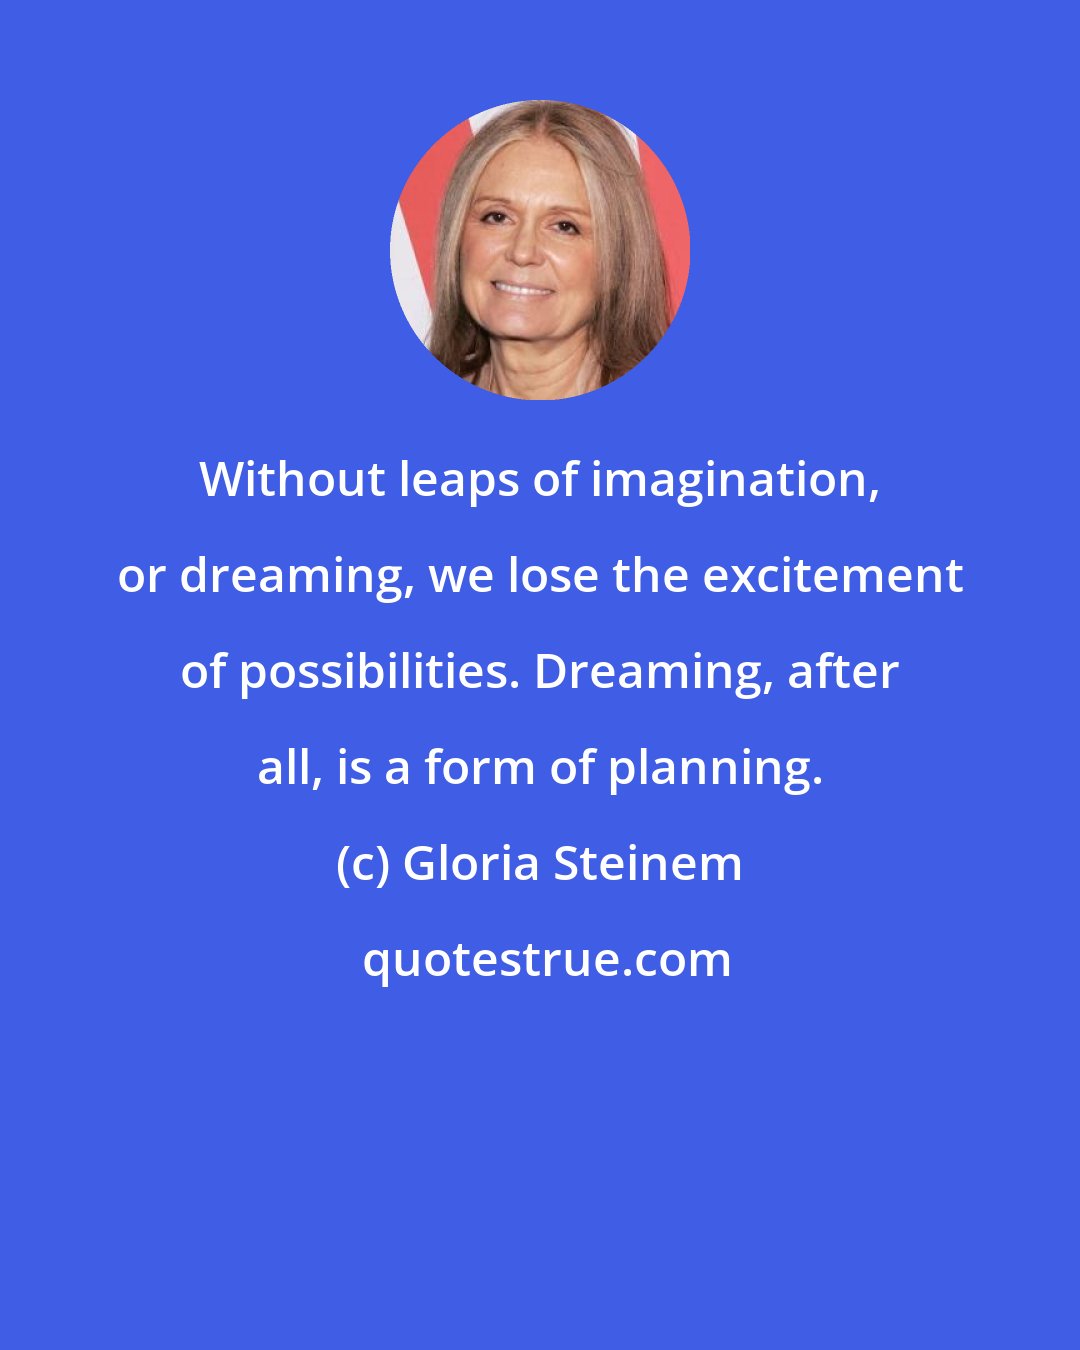 Gloria Steinem: Without leaps of imagination, or dreaming, we lose the excitement of possibilities. Dreaming, after all, is a form of planning.